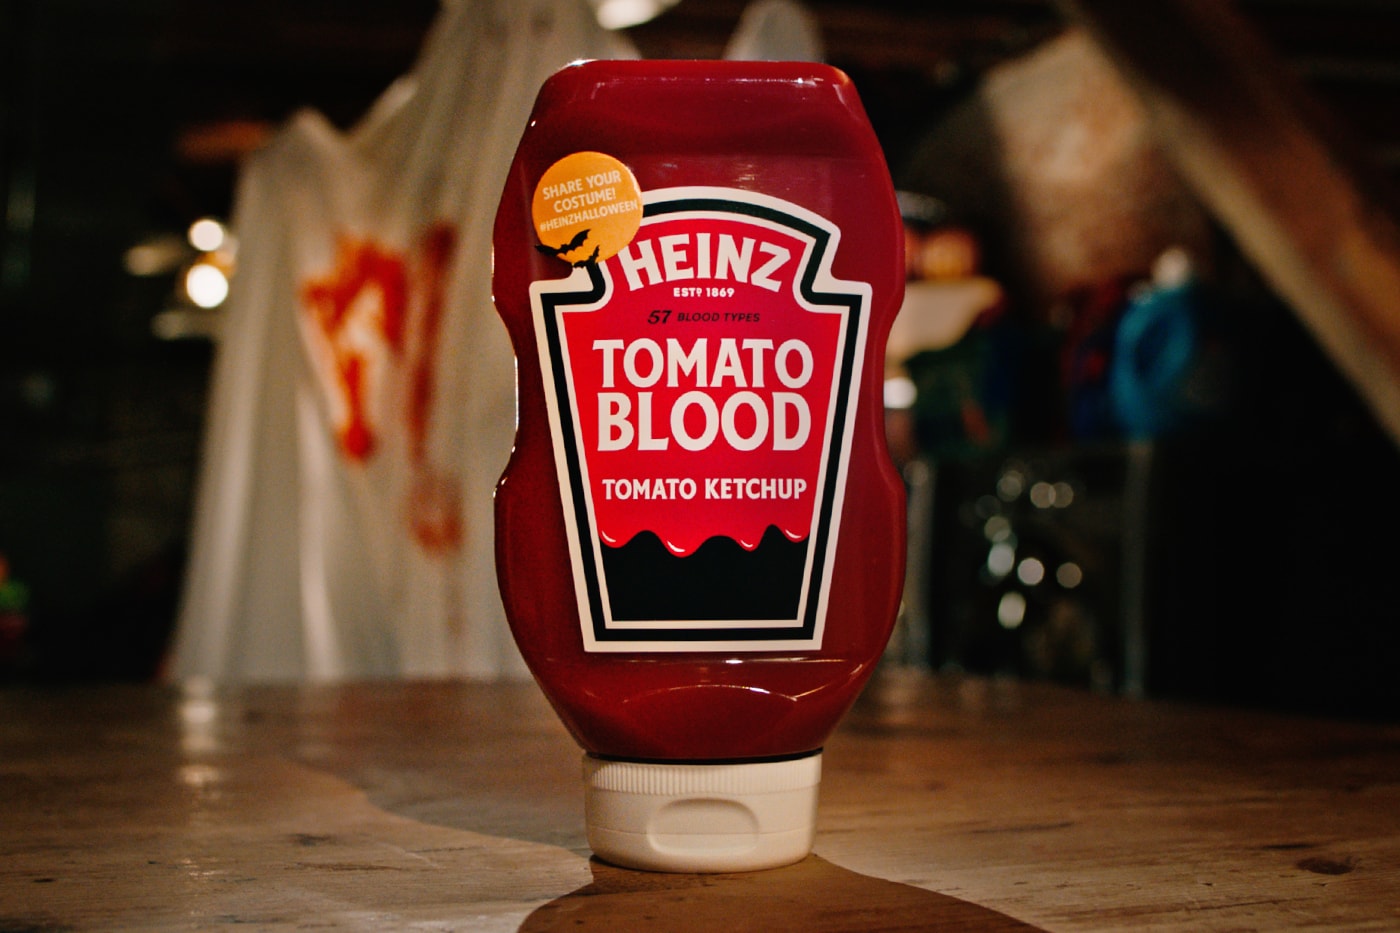 halloween heinz tomato blood costume kit tomato blood ketchup fangs face paint applicators tattoos spooky october 12 festive holiday release info 